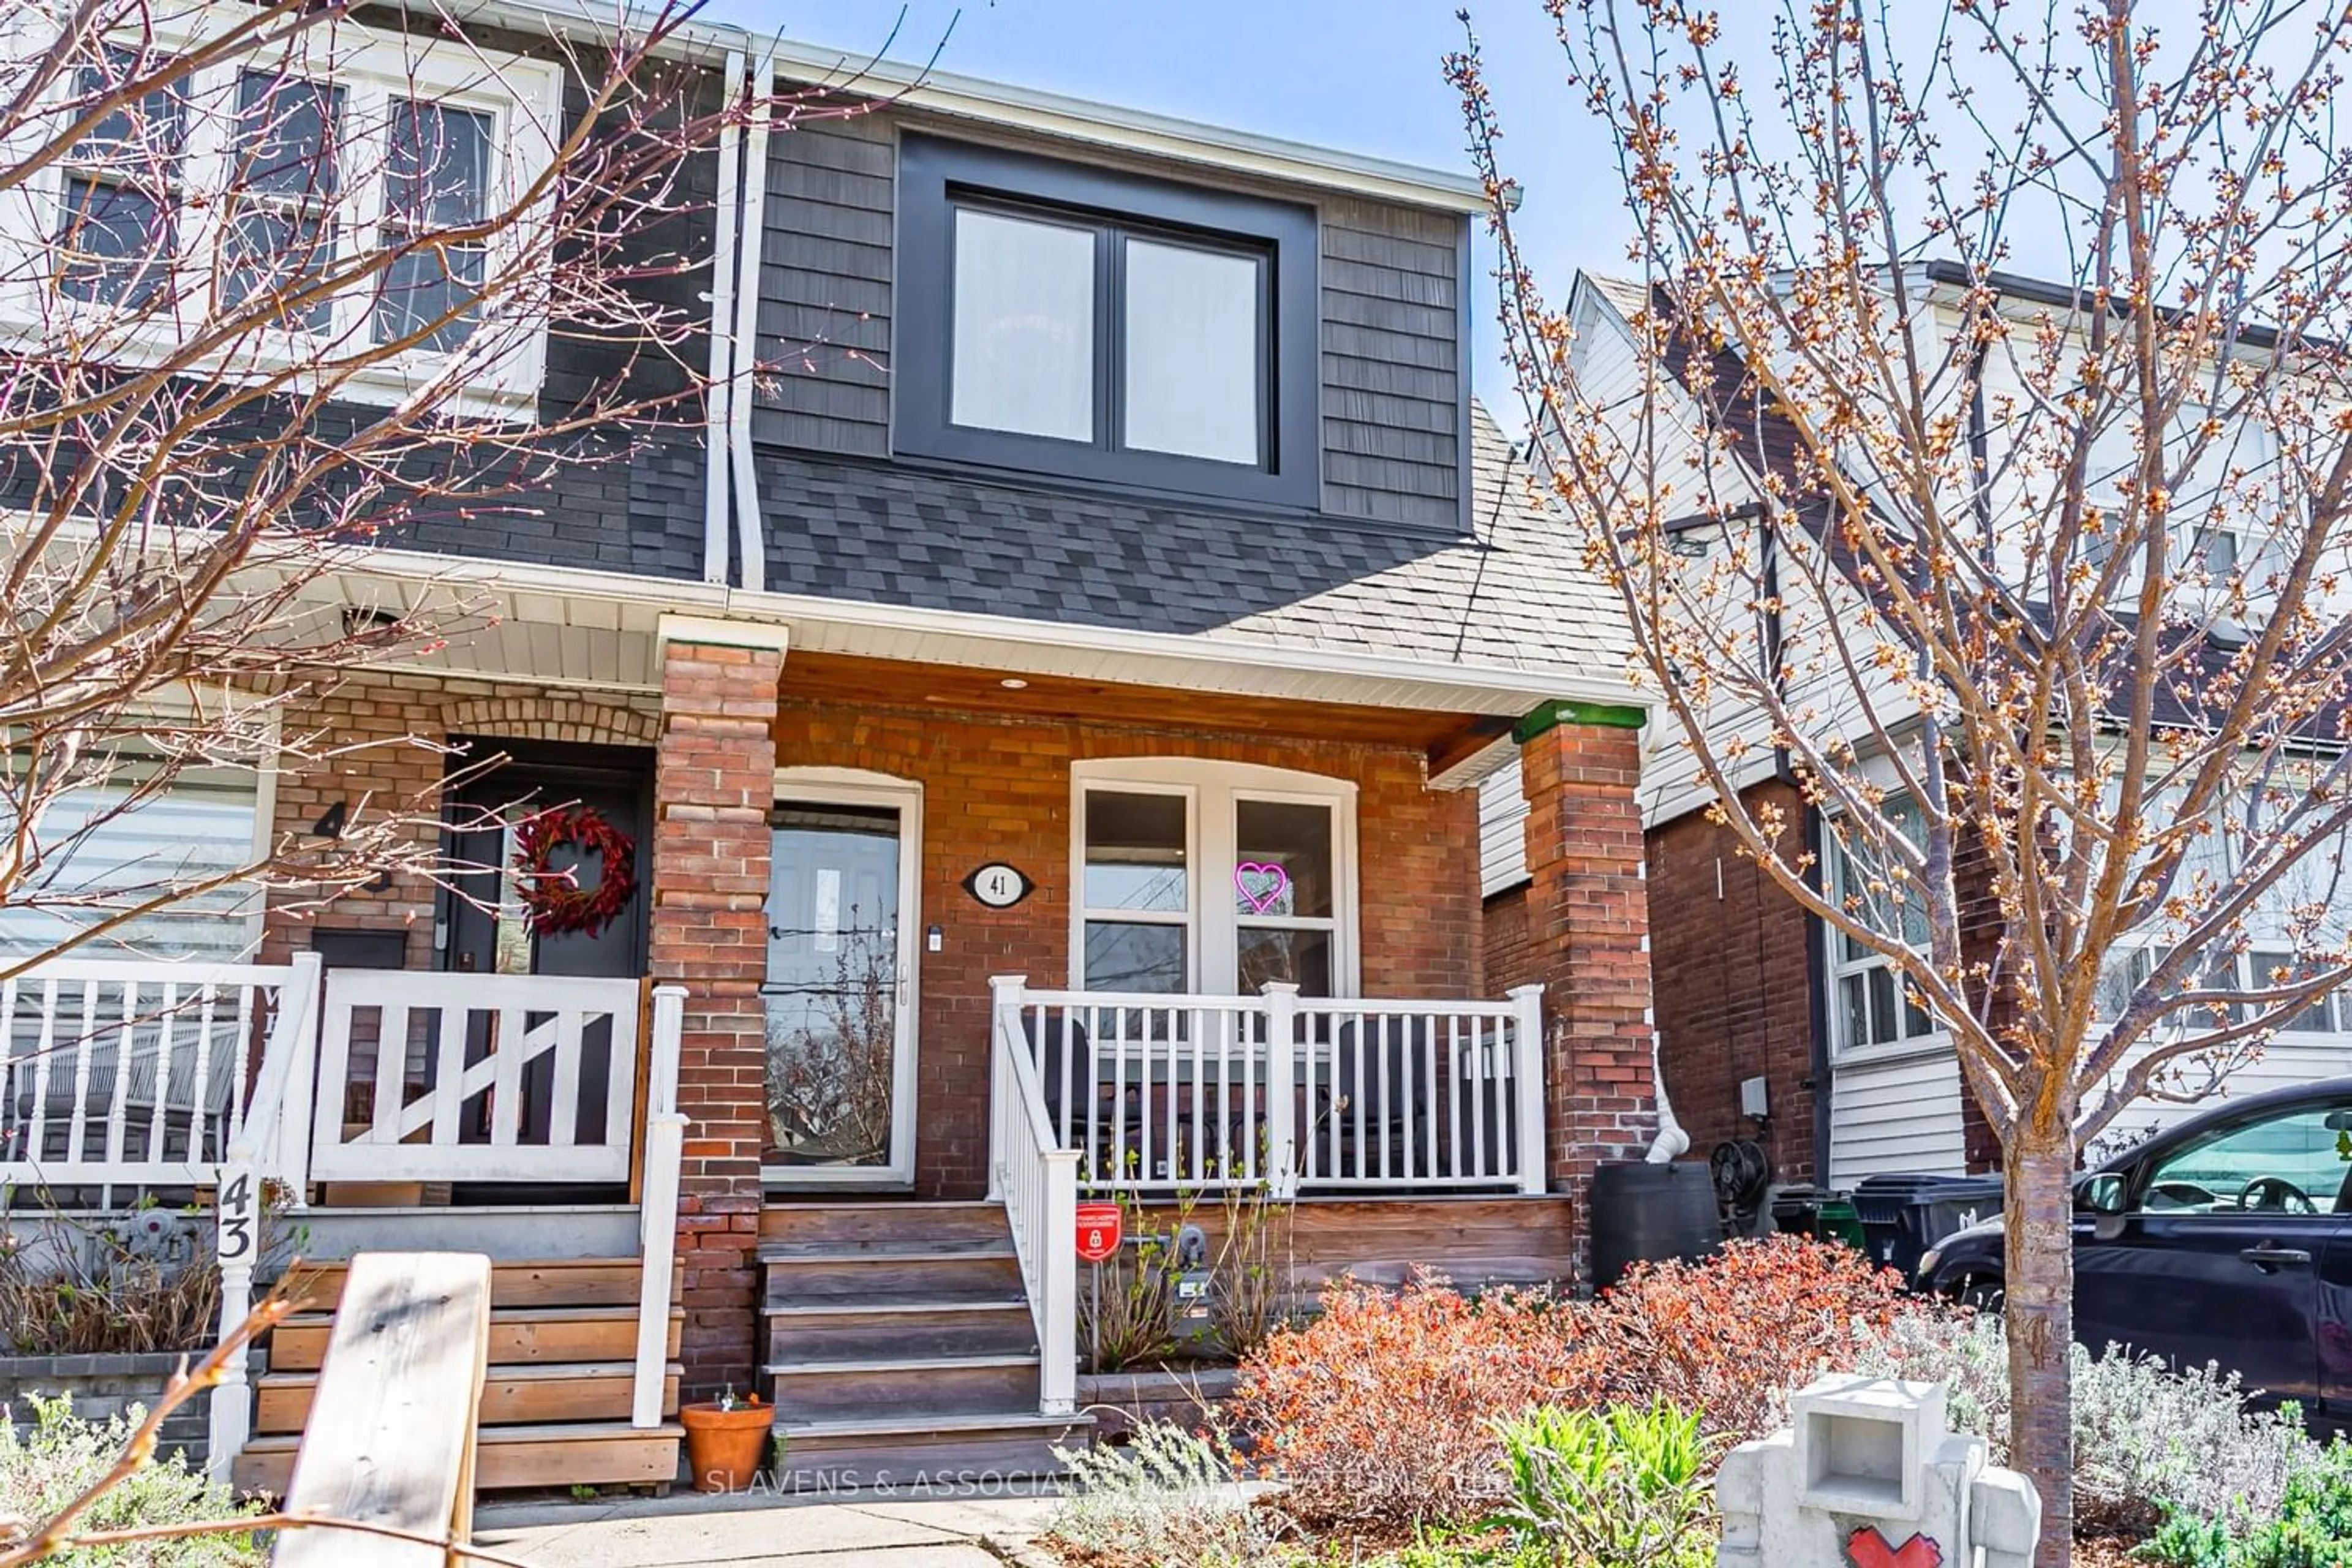 Home with brick exterior material for 41 Barrington Ave, Toronto Ontario M4C 4Y6